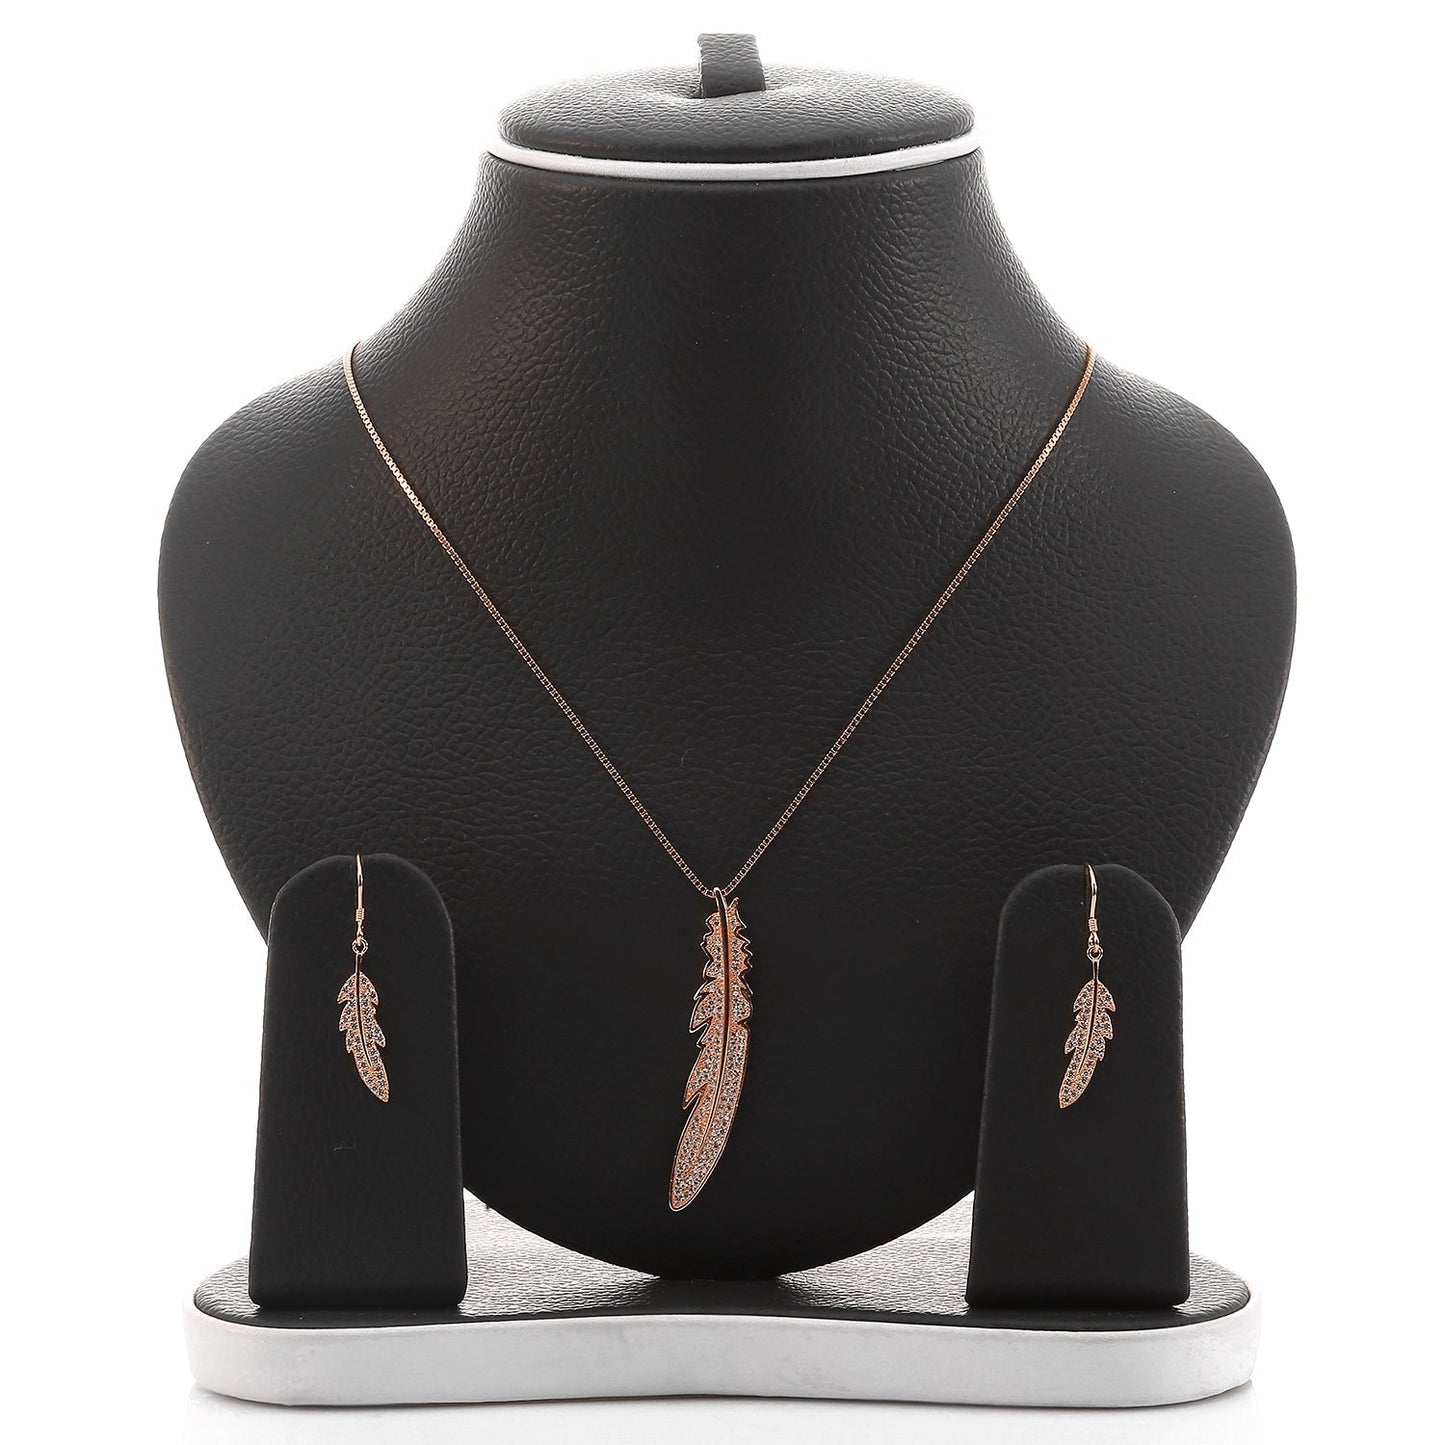 Feather Pendant Necklace and Earring Set - ARJW1015RG ARCADIO